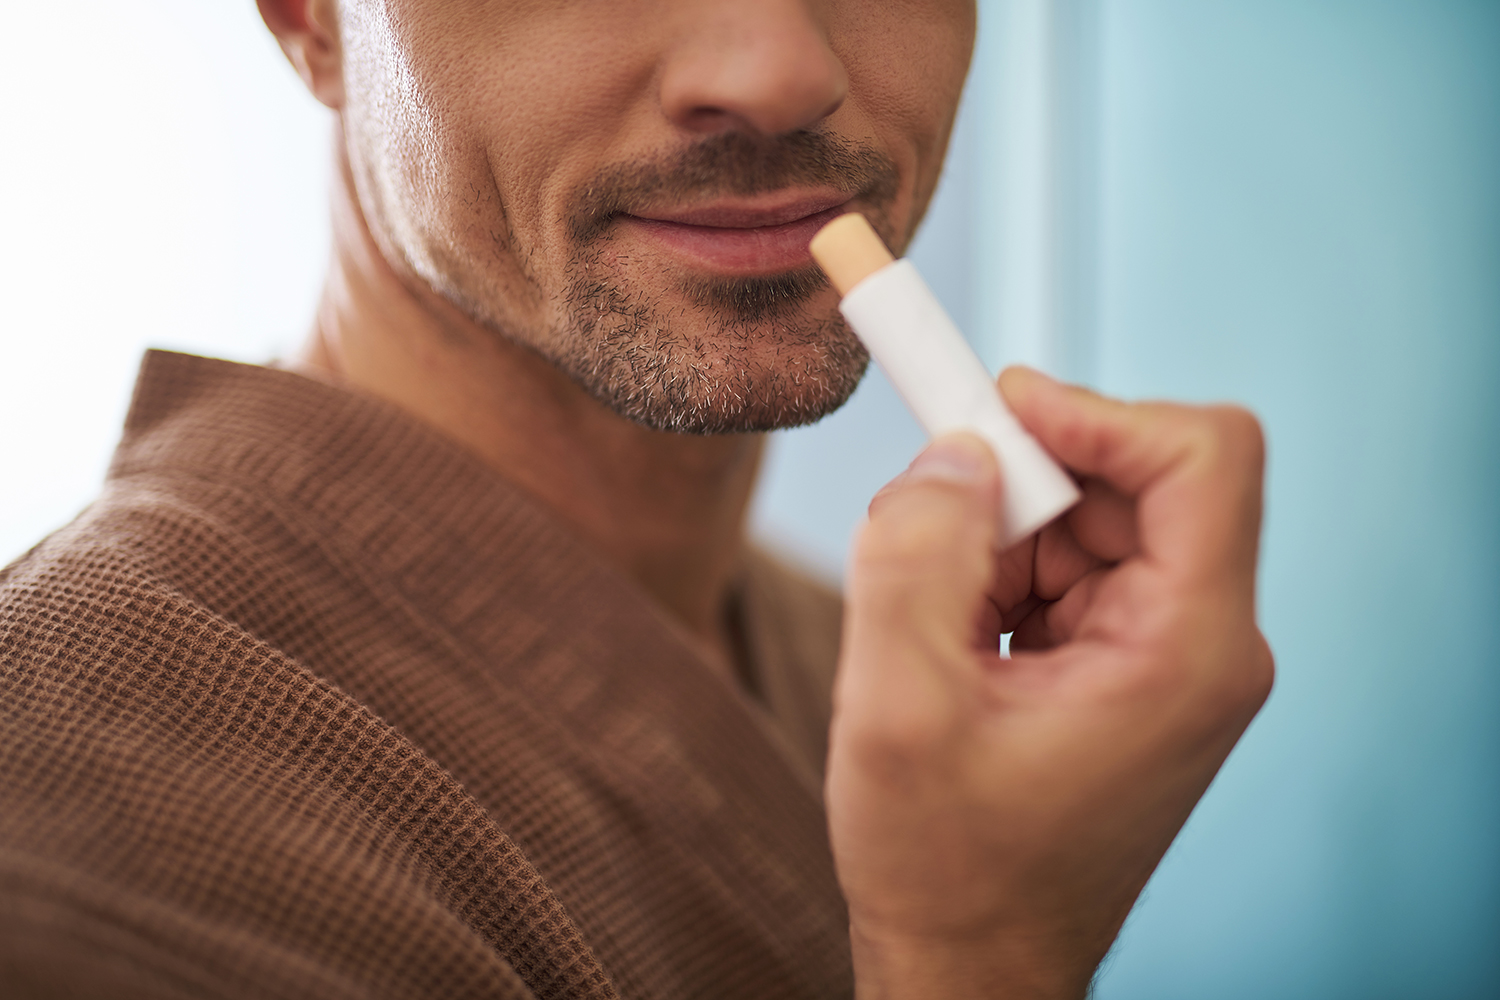 The 11 Best Lip Balms for Men to Try in 2022 - The Manual